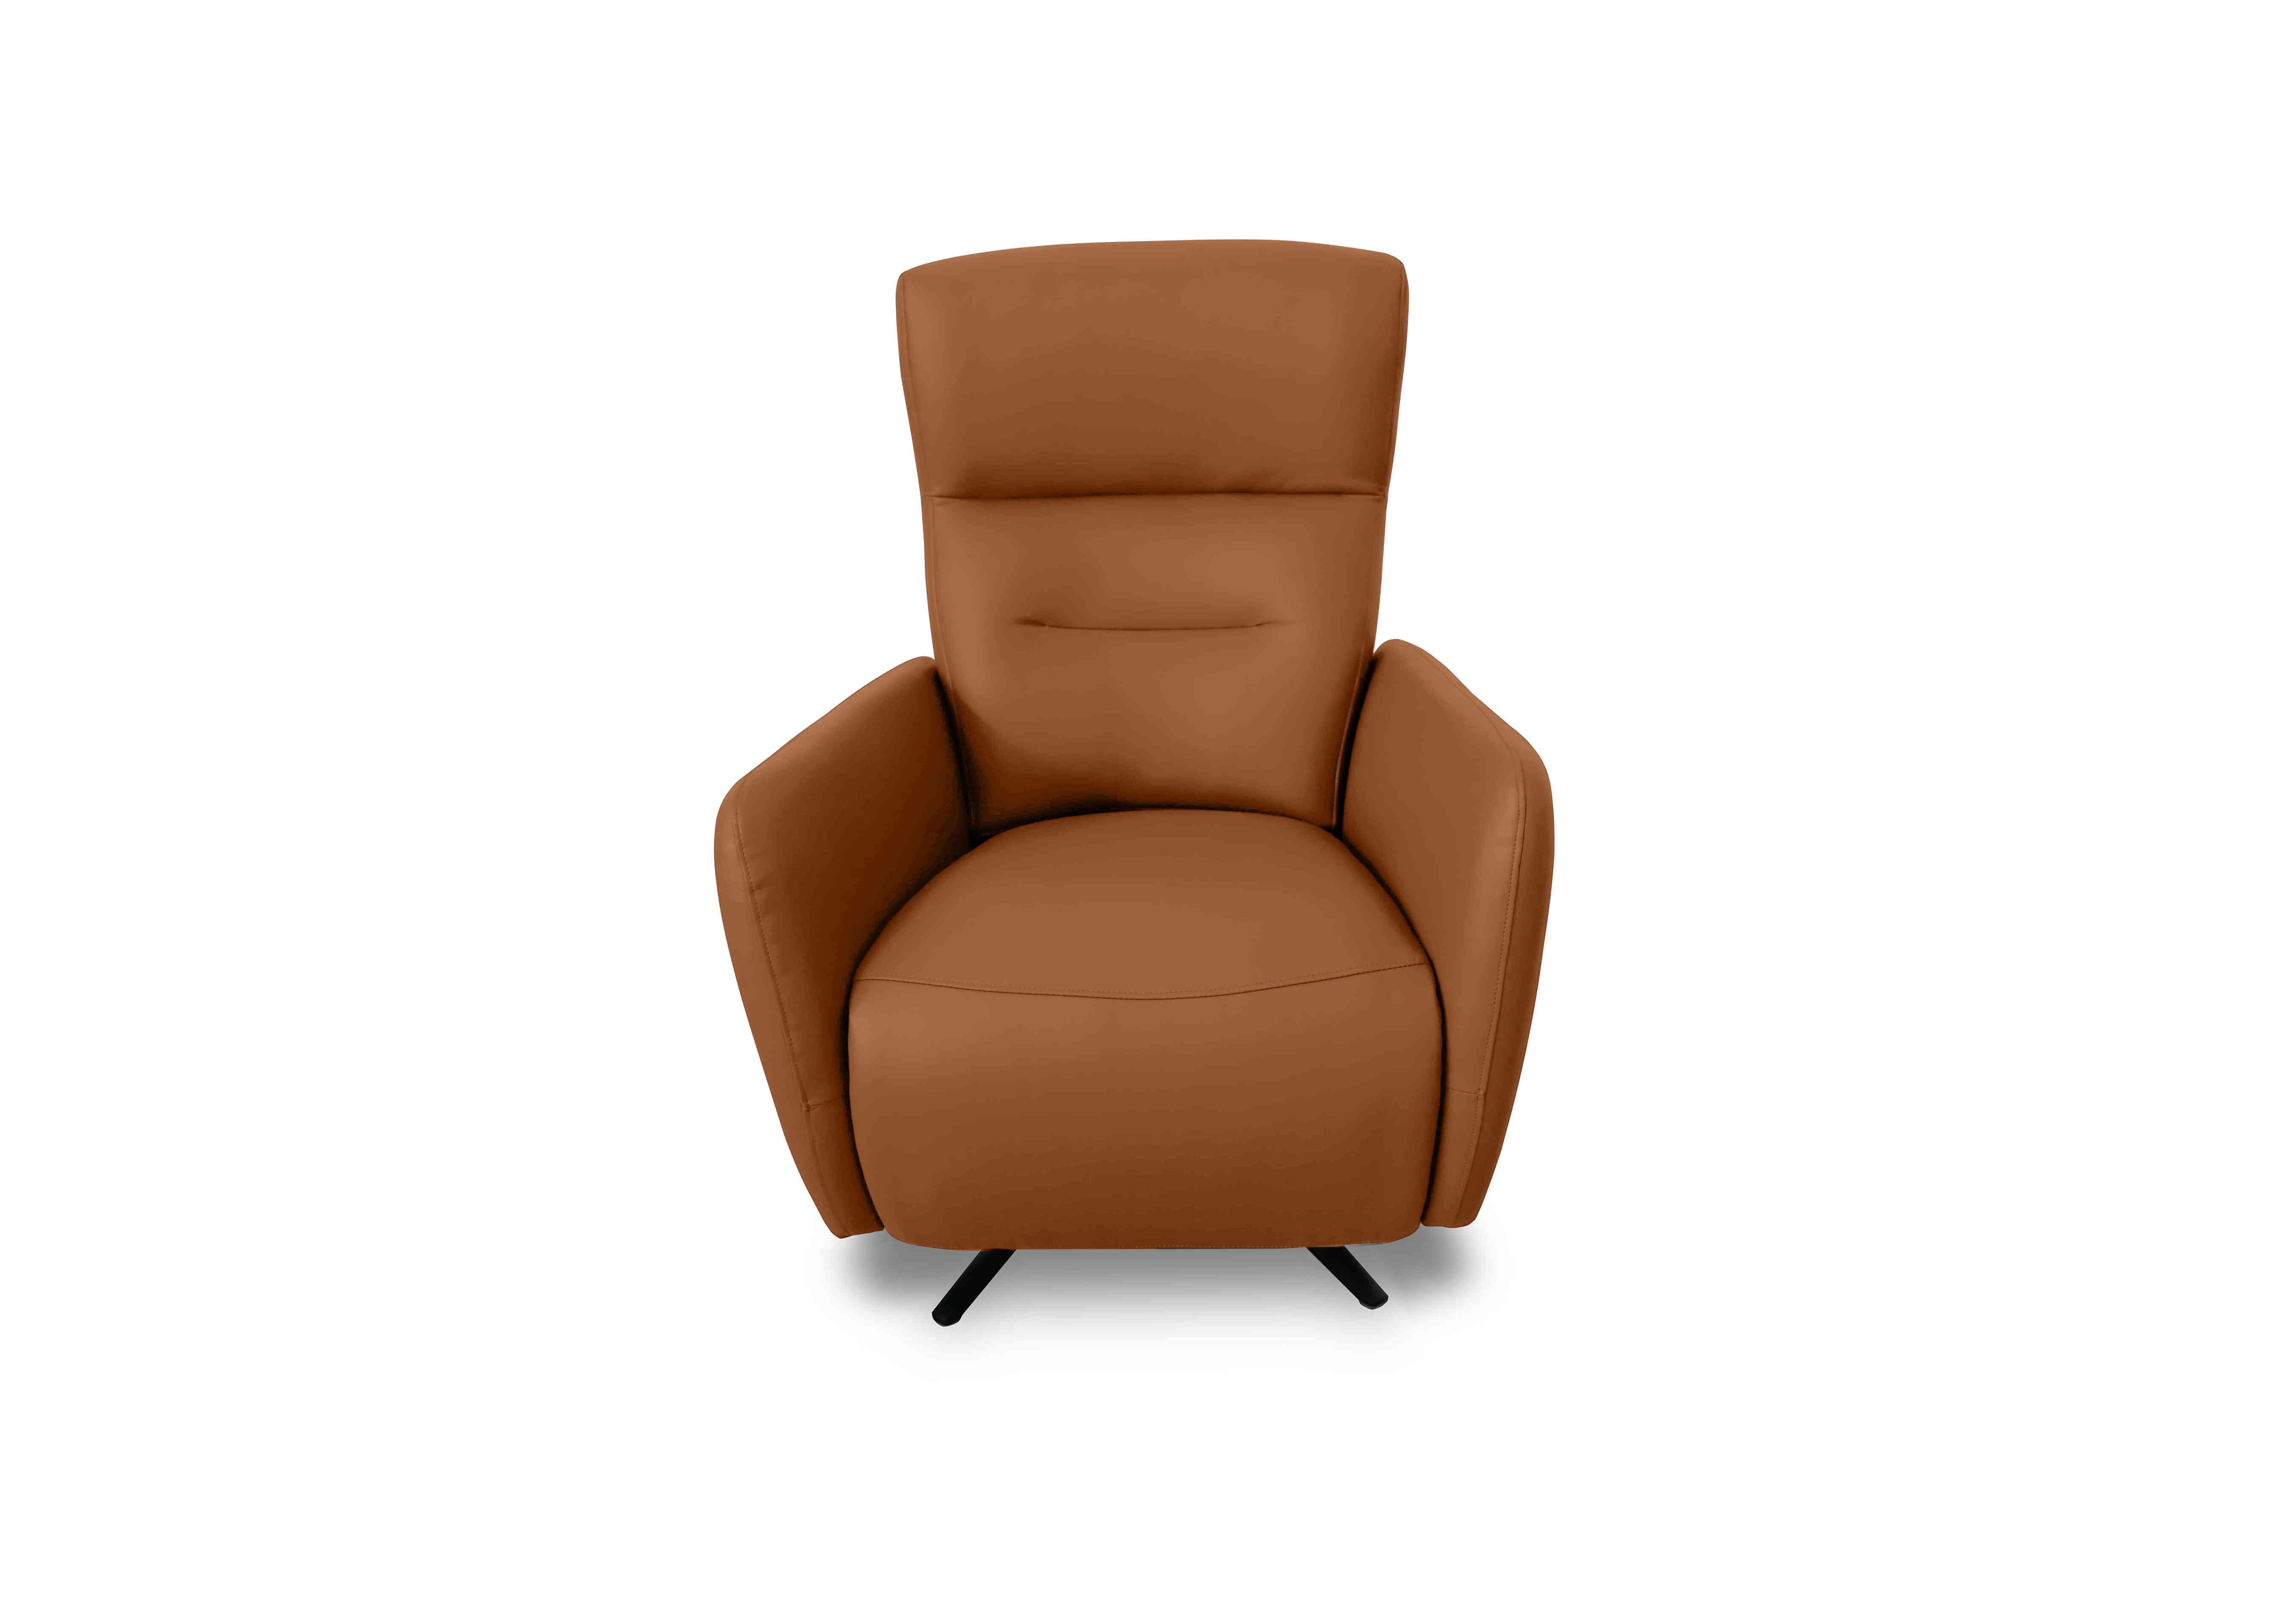 Designer Chair Collection Le Mans Leather Dual Power Recliner Swivel Chair in Hw-602b Pecan Brown on Furniture Village